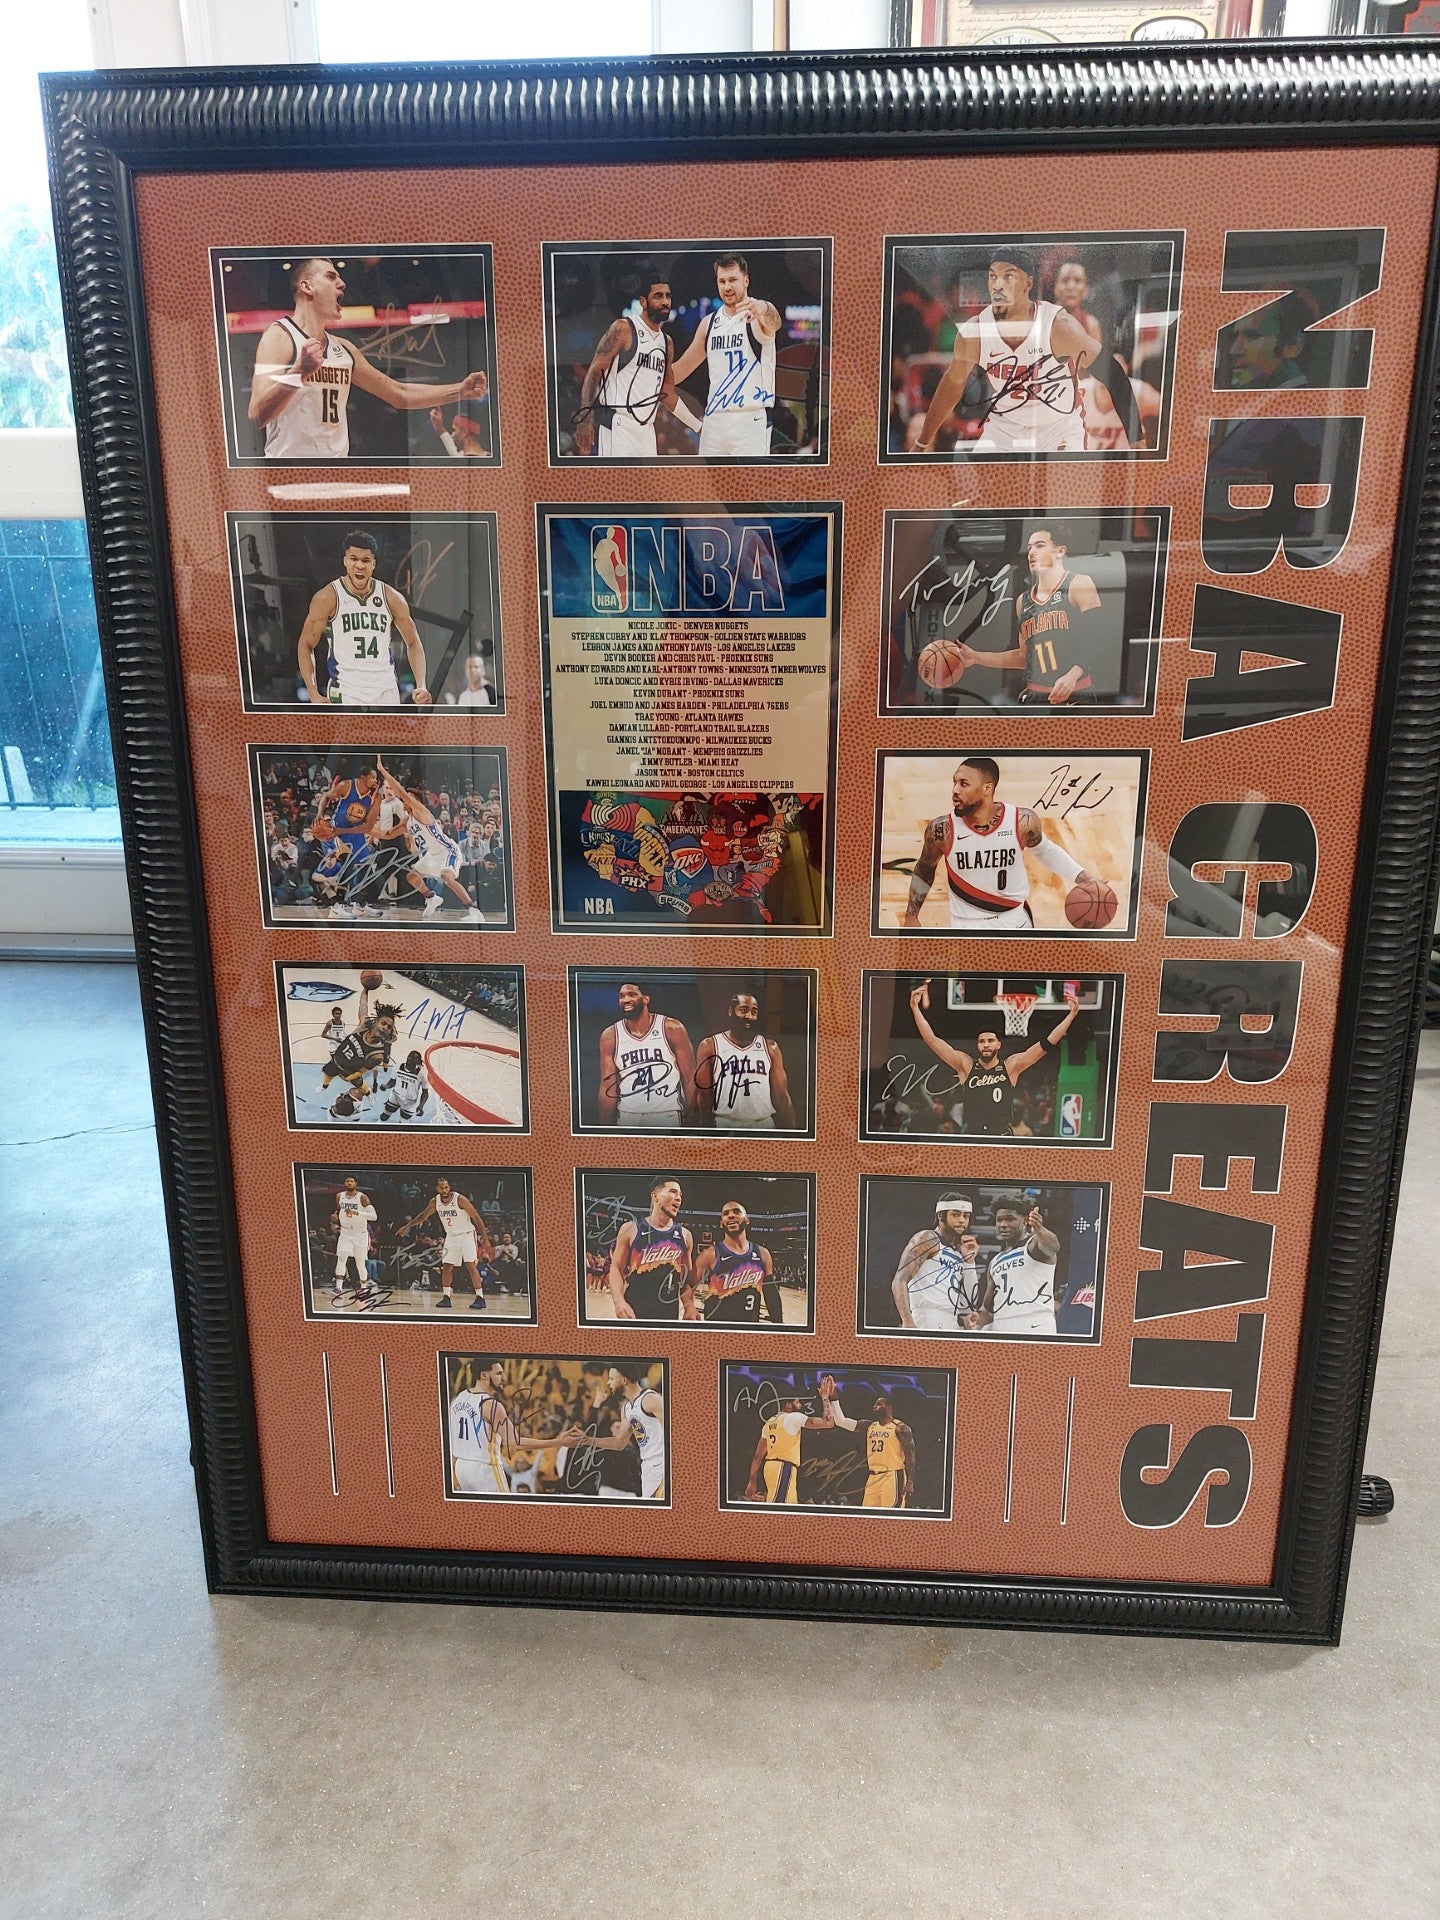 NBA Stars 35x45 inches framed and signed with proof LeBron James, Nikola Jokic, Luka Doncic, Joel Embiid